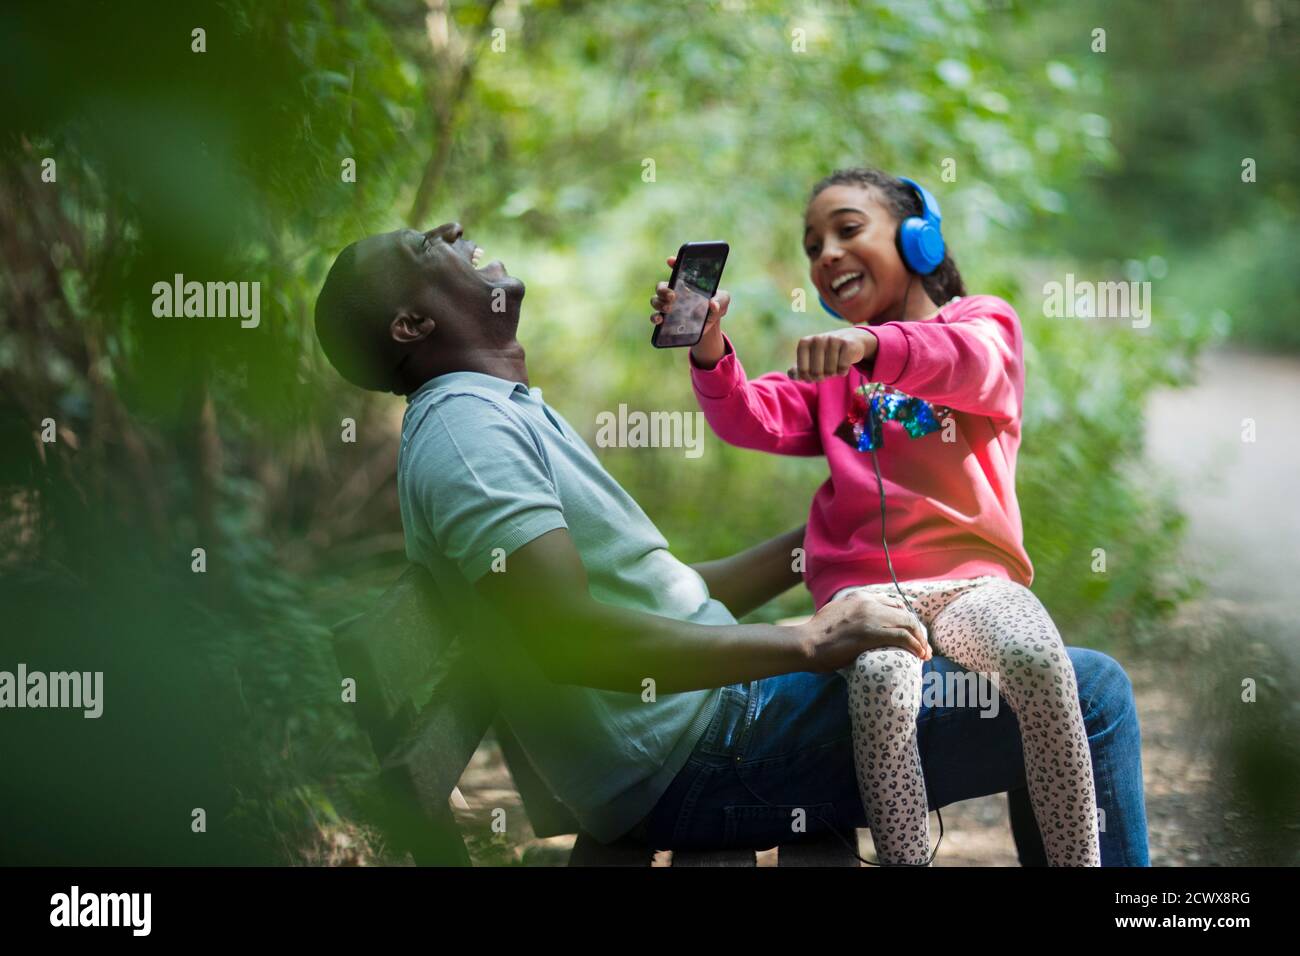 Happy father and daughter laughing on park bench Stock Photo